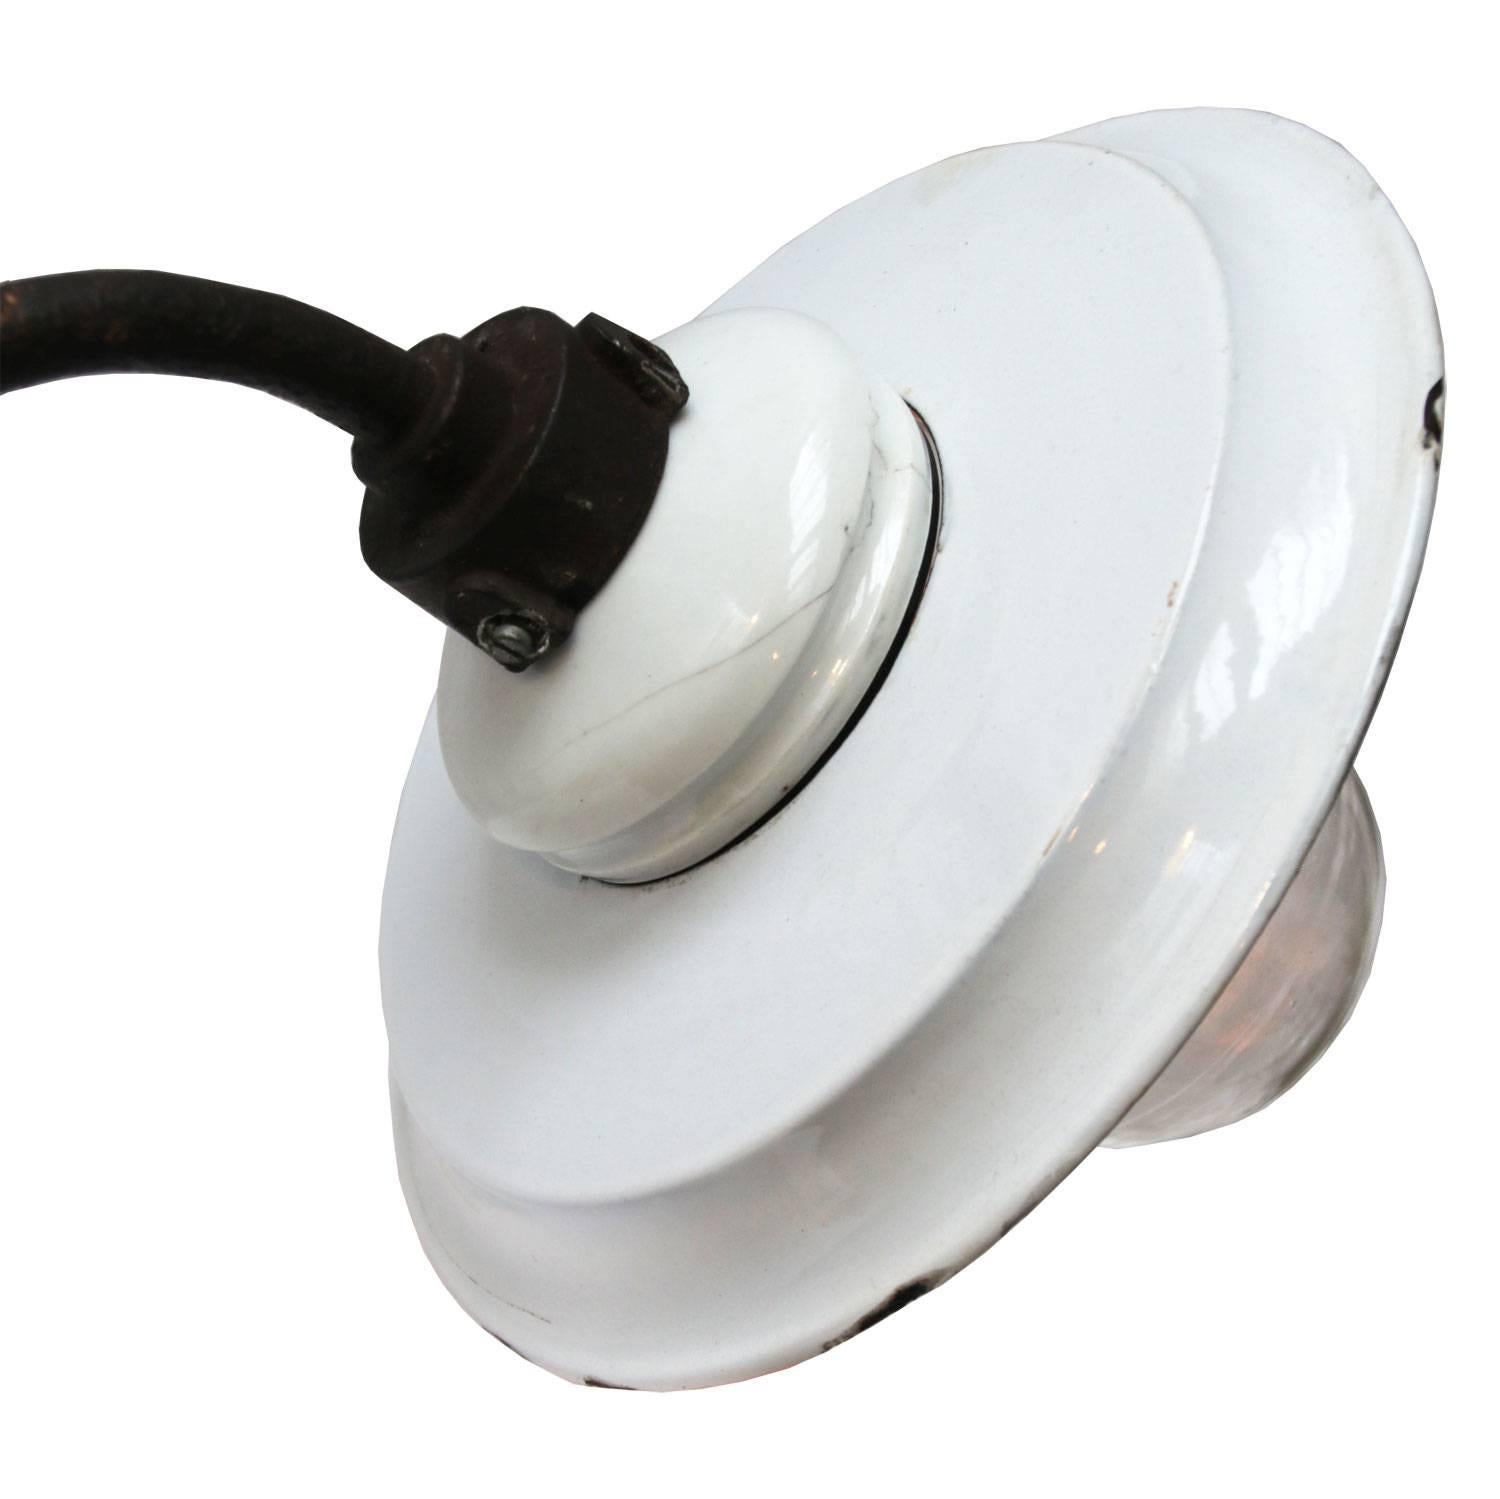 White enamel industrial wall light with white interior.
Cast iron and porcelain top. Clear glass. Enamel shade available in multiple colors.
Diameter cast iron wall mount: 9 cm. 3 holes to secure.

Weight: 1.6 kg / 3.5 lb

Priced per individual